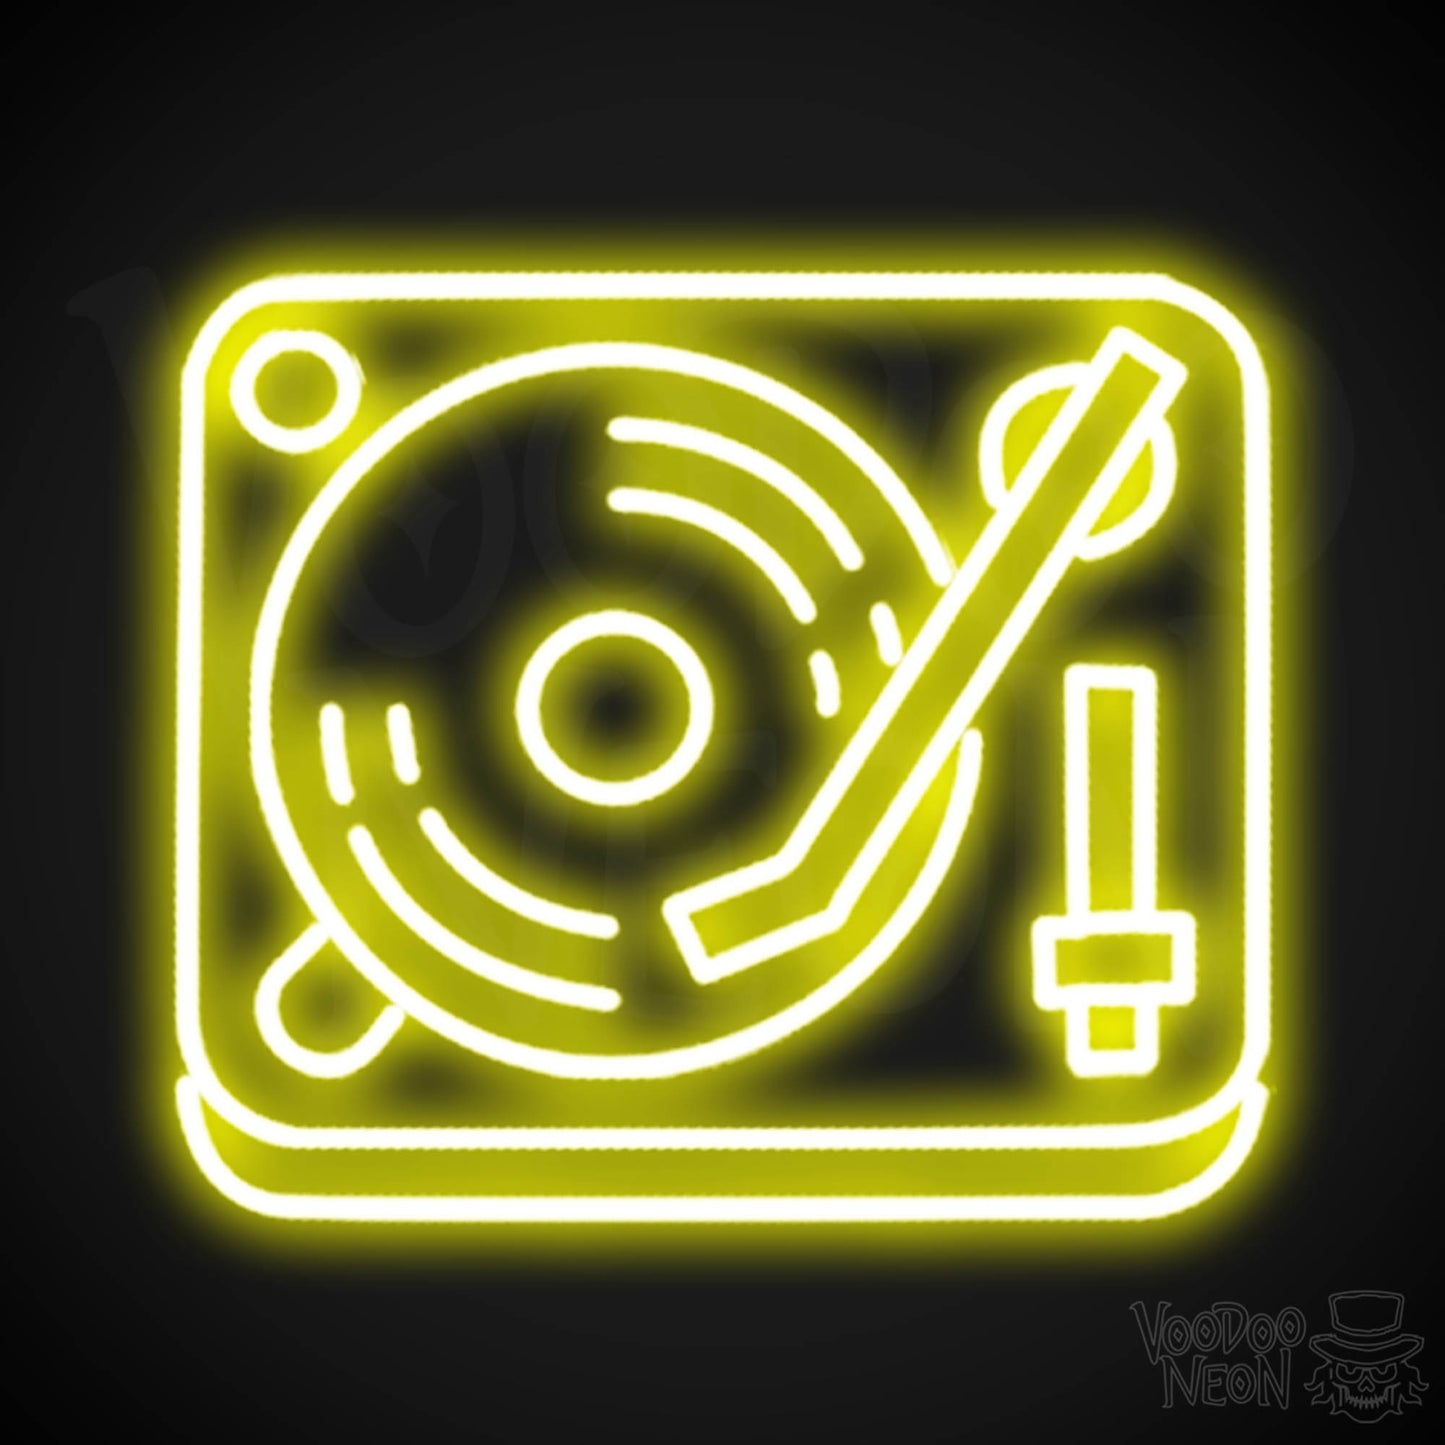 Retro Record Player Neon Sign - Record Player Neon Wall Art - Color Yellow